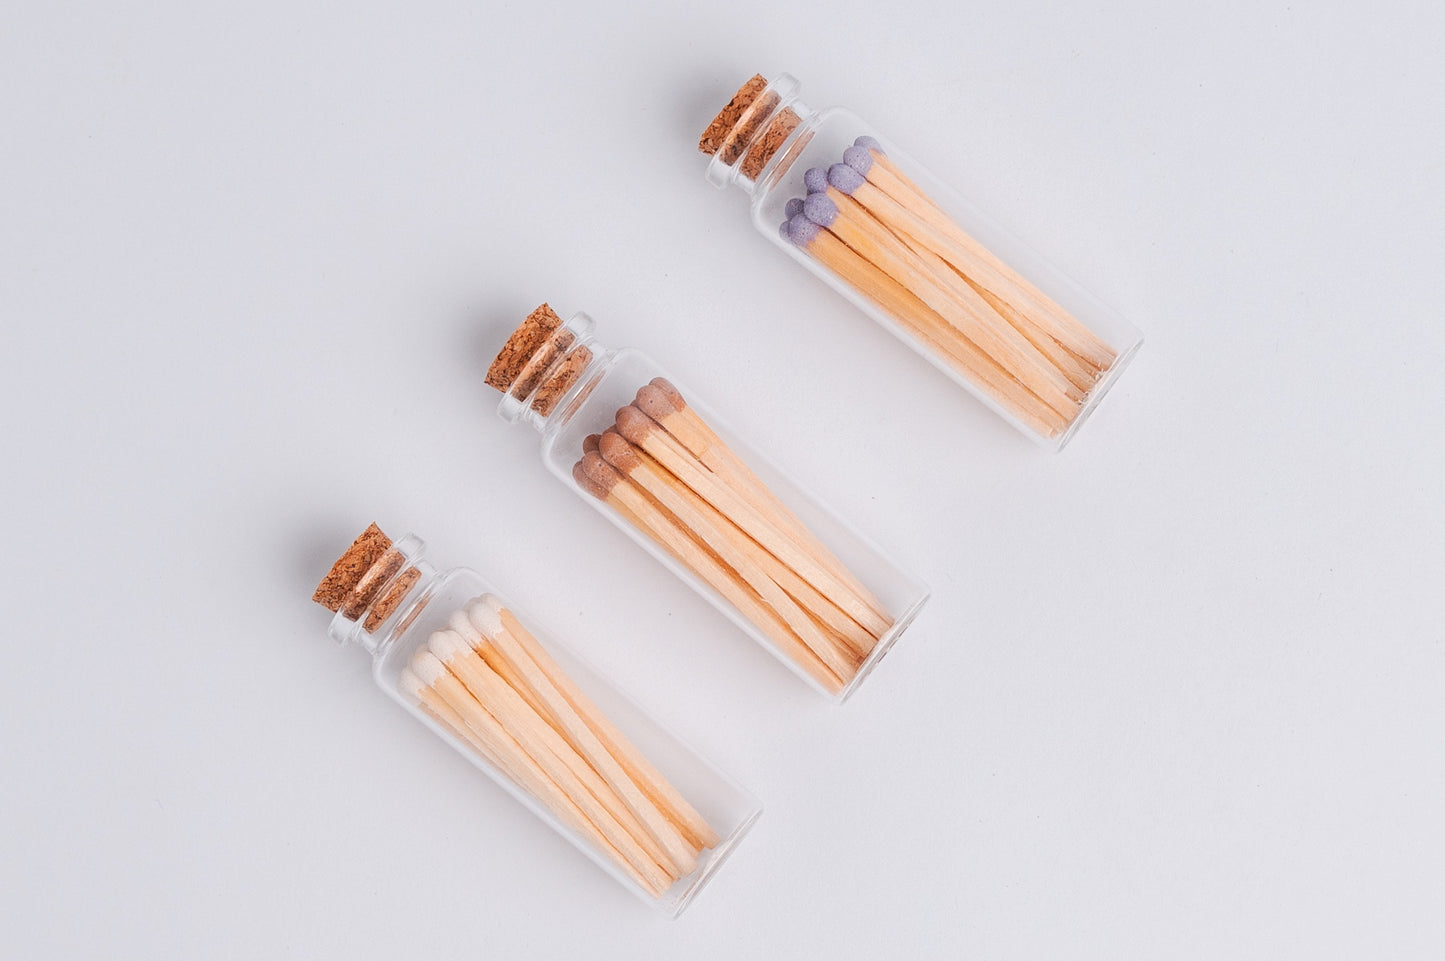 Matches - 20 Wooden Matches in Glass Jar